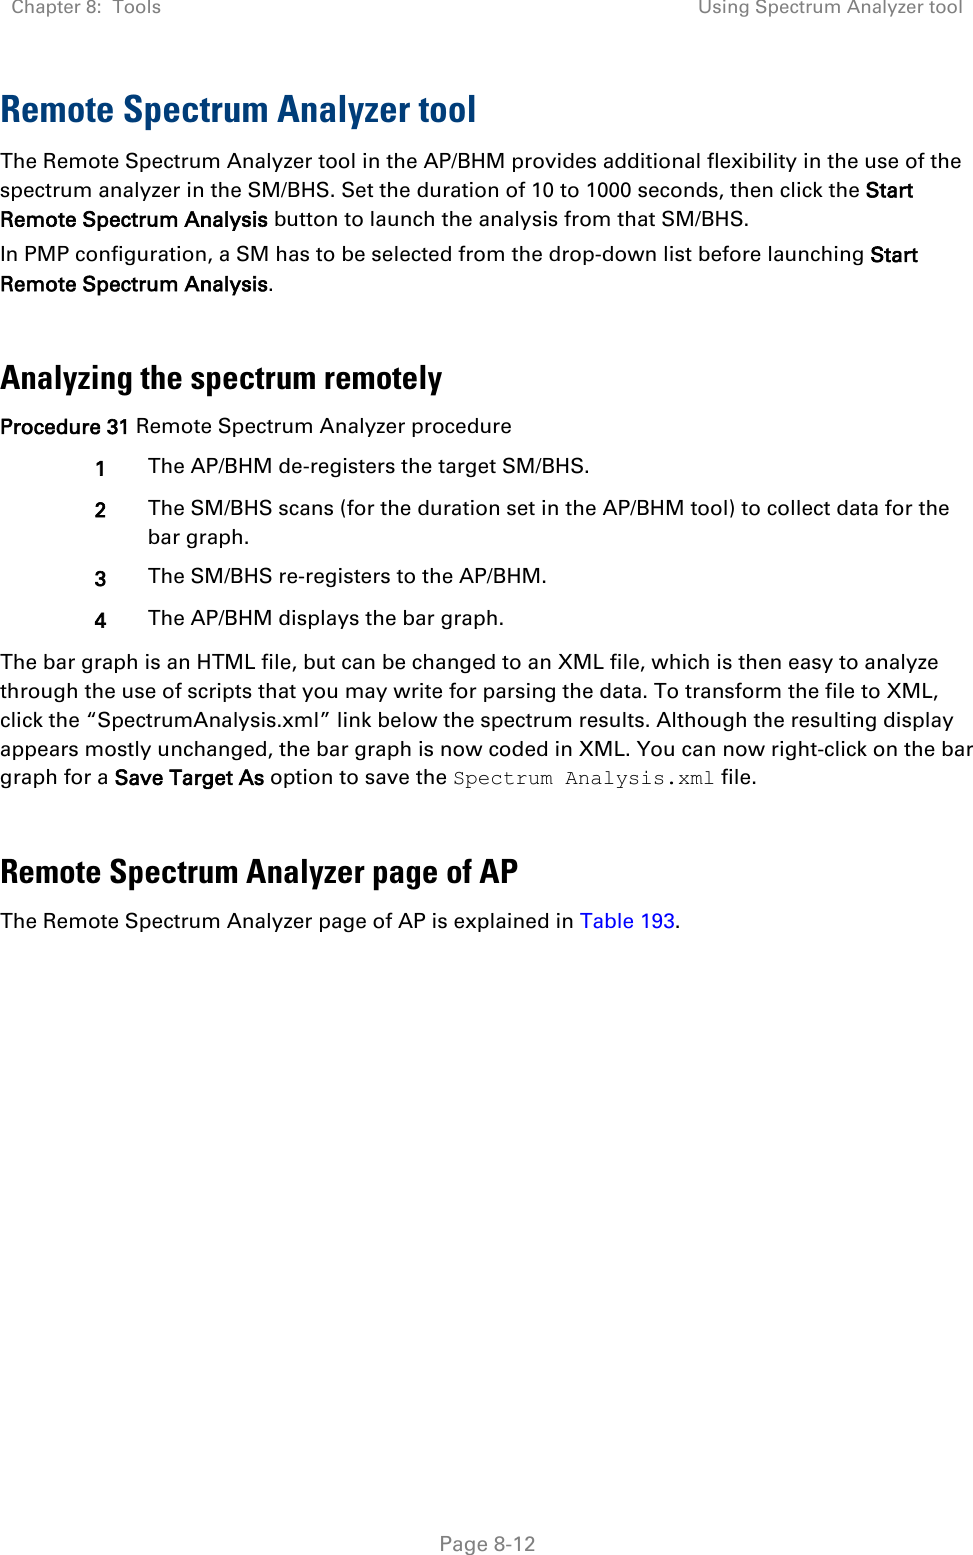 Chapter 8:  Tools Using Spectrum Analyzer tool   Page 8-12 Remote Spectrum Analyzer tool  The Remote Spectrum Analyzer tool in the AP/BHM provides additional flexibility in the use of the spectrum analyzer in the SM/BHS. Set the duration of 10 to 1000 seconds, then click the Start Remote Spectrum Analysis button to launch the analysis from that SM/BHS.  In PMP configuration, a SM has to be selected from the drop-down list before launching Start Remote Spectrum Analysis.  Analyzing the spectrum remotely Procedure 31 Remote Spectrum Analyzer procedure 1 The AP/BHM de-registers the target SM/BHS. 2 The SM/BHS scans (for the duration set in the AP/BHM tool) to collect data for the bar graph. 3 The SM/BHS re-registers to the AP/BHM. 4 The AP/BHM displays the bar graph. The bar graph is an HTML file, but can be changed to an XML file, which is then easy to analyze through the use of scripts that you may write for parsing the data. To transform the file to XML, click the “SpectrumAnalysis.xml” link below the spectrum results. Although the resulting display appears mostly unchanged, the bar graph is now coded in XML. You can now right-click on the bar graph for a Save Target As option to save the Spectrum Analysis.xml file.  Remote Spectrum Analyzer page of AP The Remote Spectrum Analyzer page of AP is explained in Table 193. 